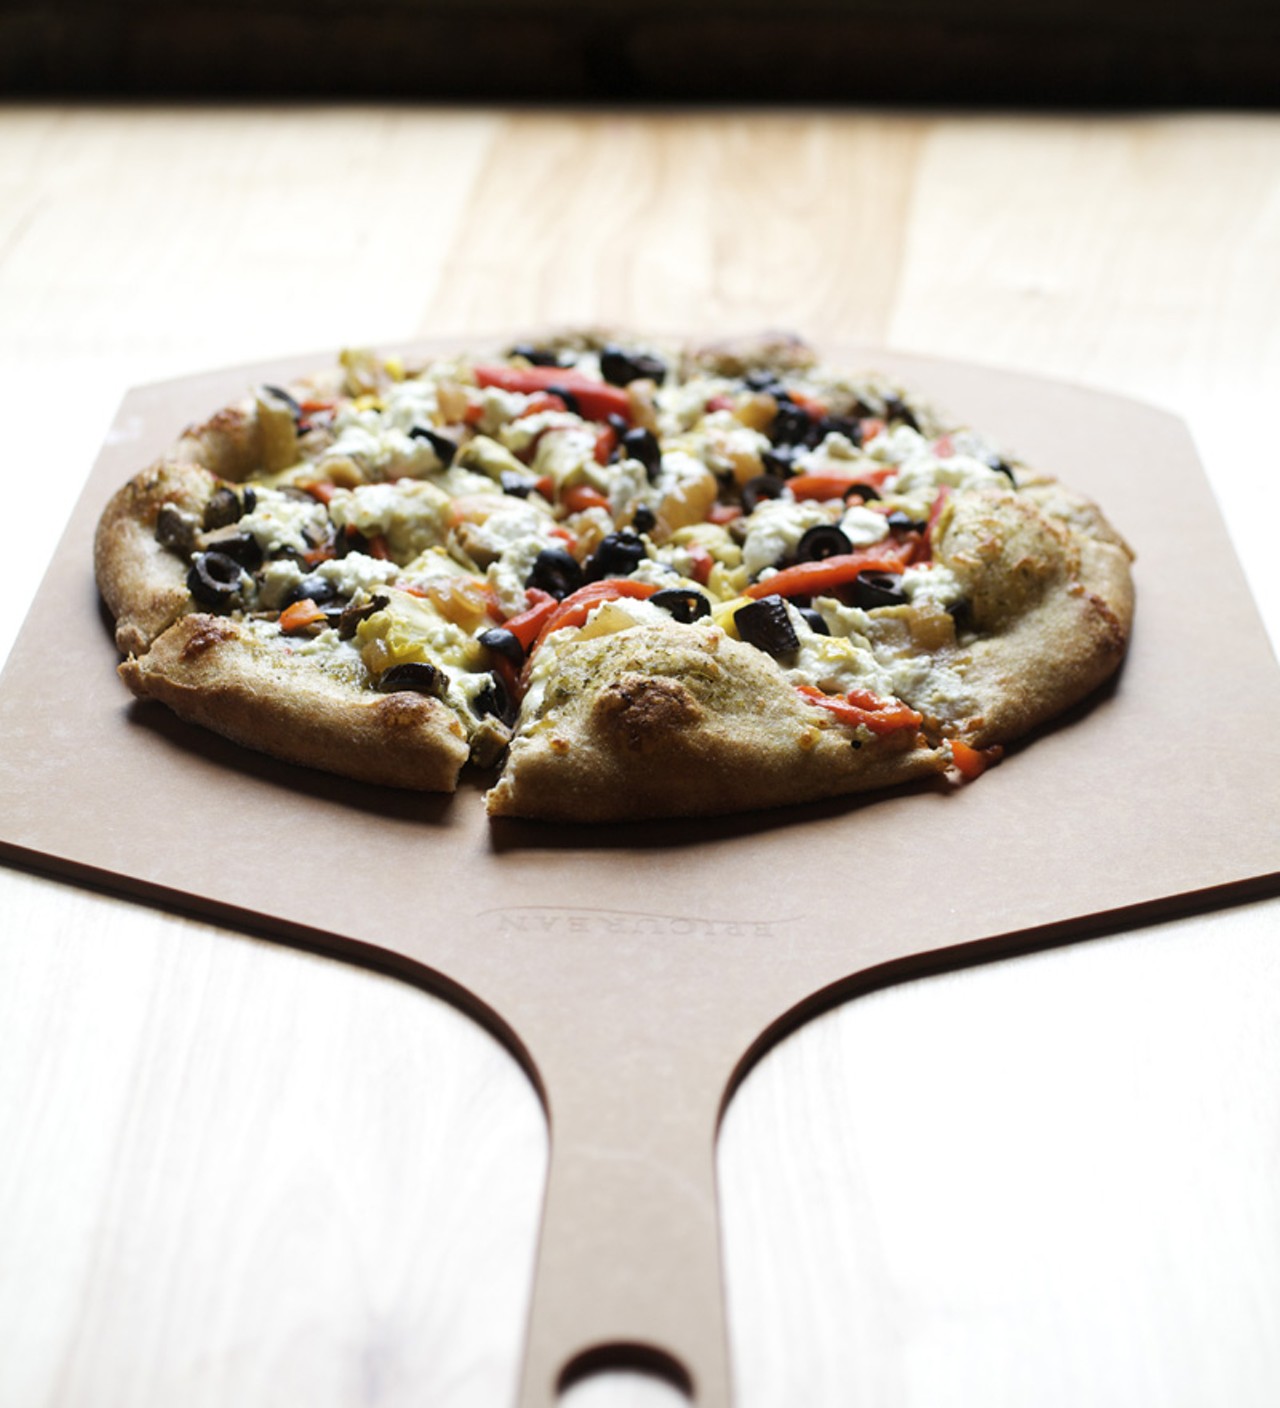 The Vegged Out Pizza, also available on either the PW Original, Honey Wheat or Gluten Free crust, is prepared with chimichurri, roasted eggplant, roasted red pepper, artichoke heart, caramelized onion, black olive, mozzarella & goat cheese.